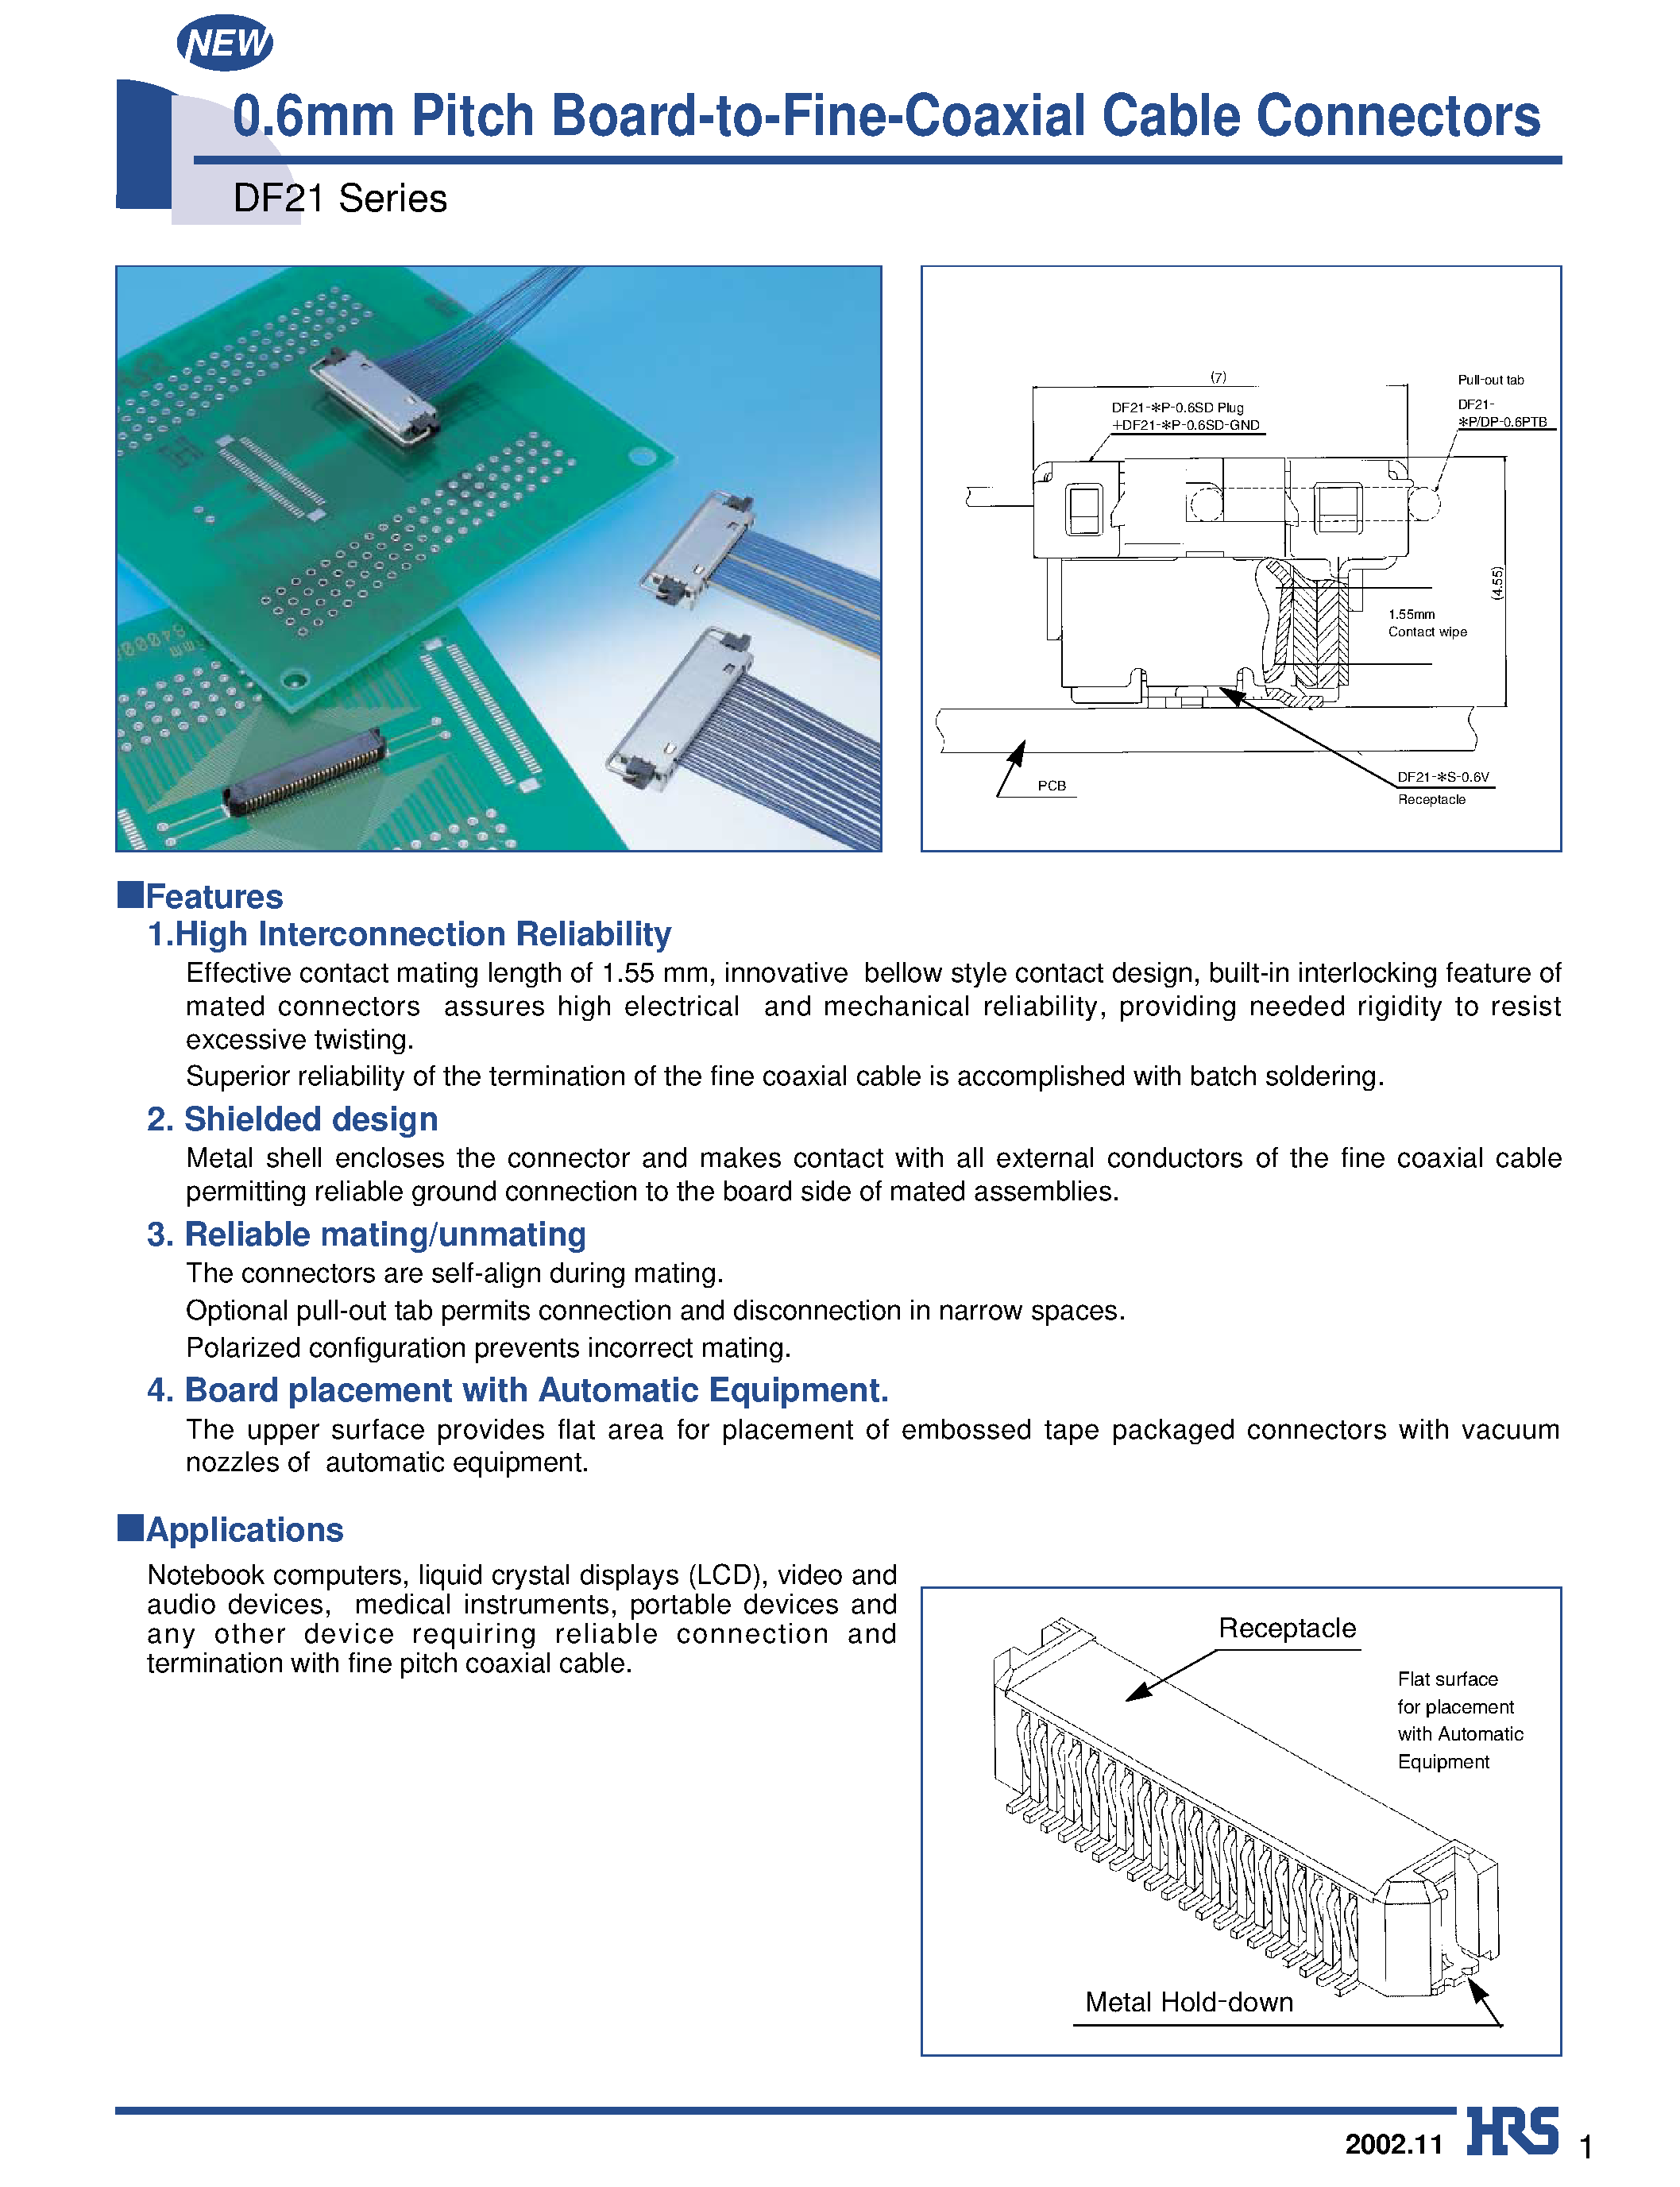 Datasheet DF21-30S-0.6V - 0.6mm Pitch Board-to-Fine-Coaxial Cable Connectors page 1